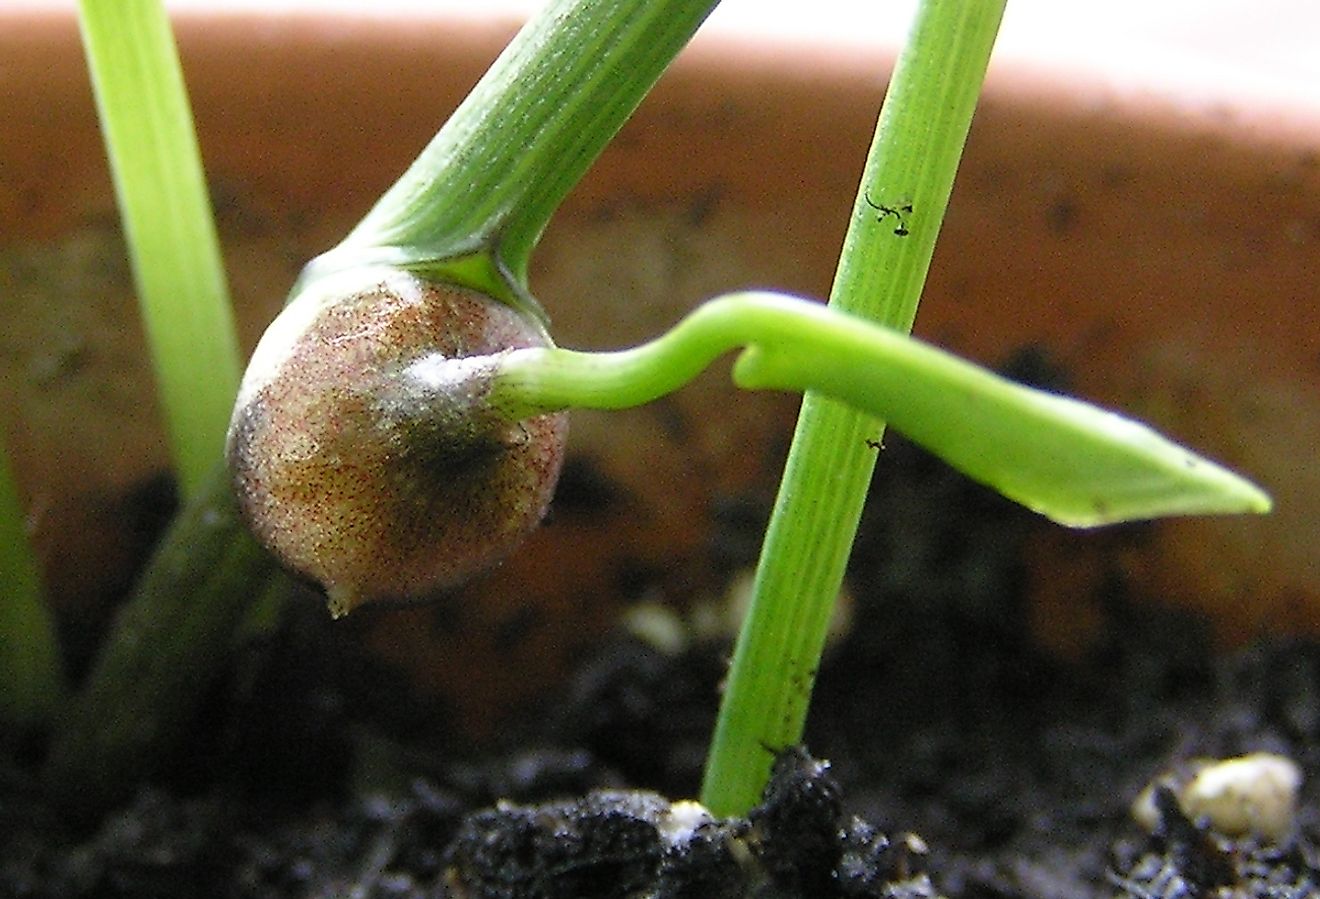 A bulbil is an aerial stem modification that develops from the axillary bud of a plant. Image credit: Enzo/Wikimedia.org